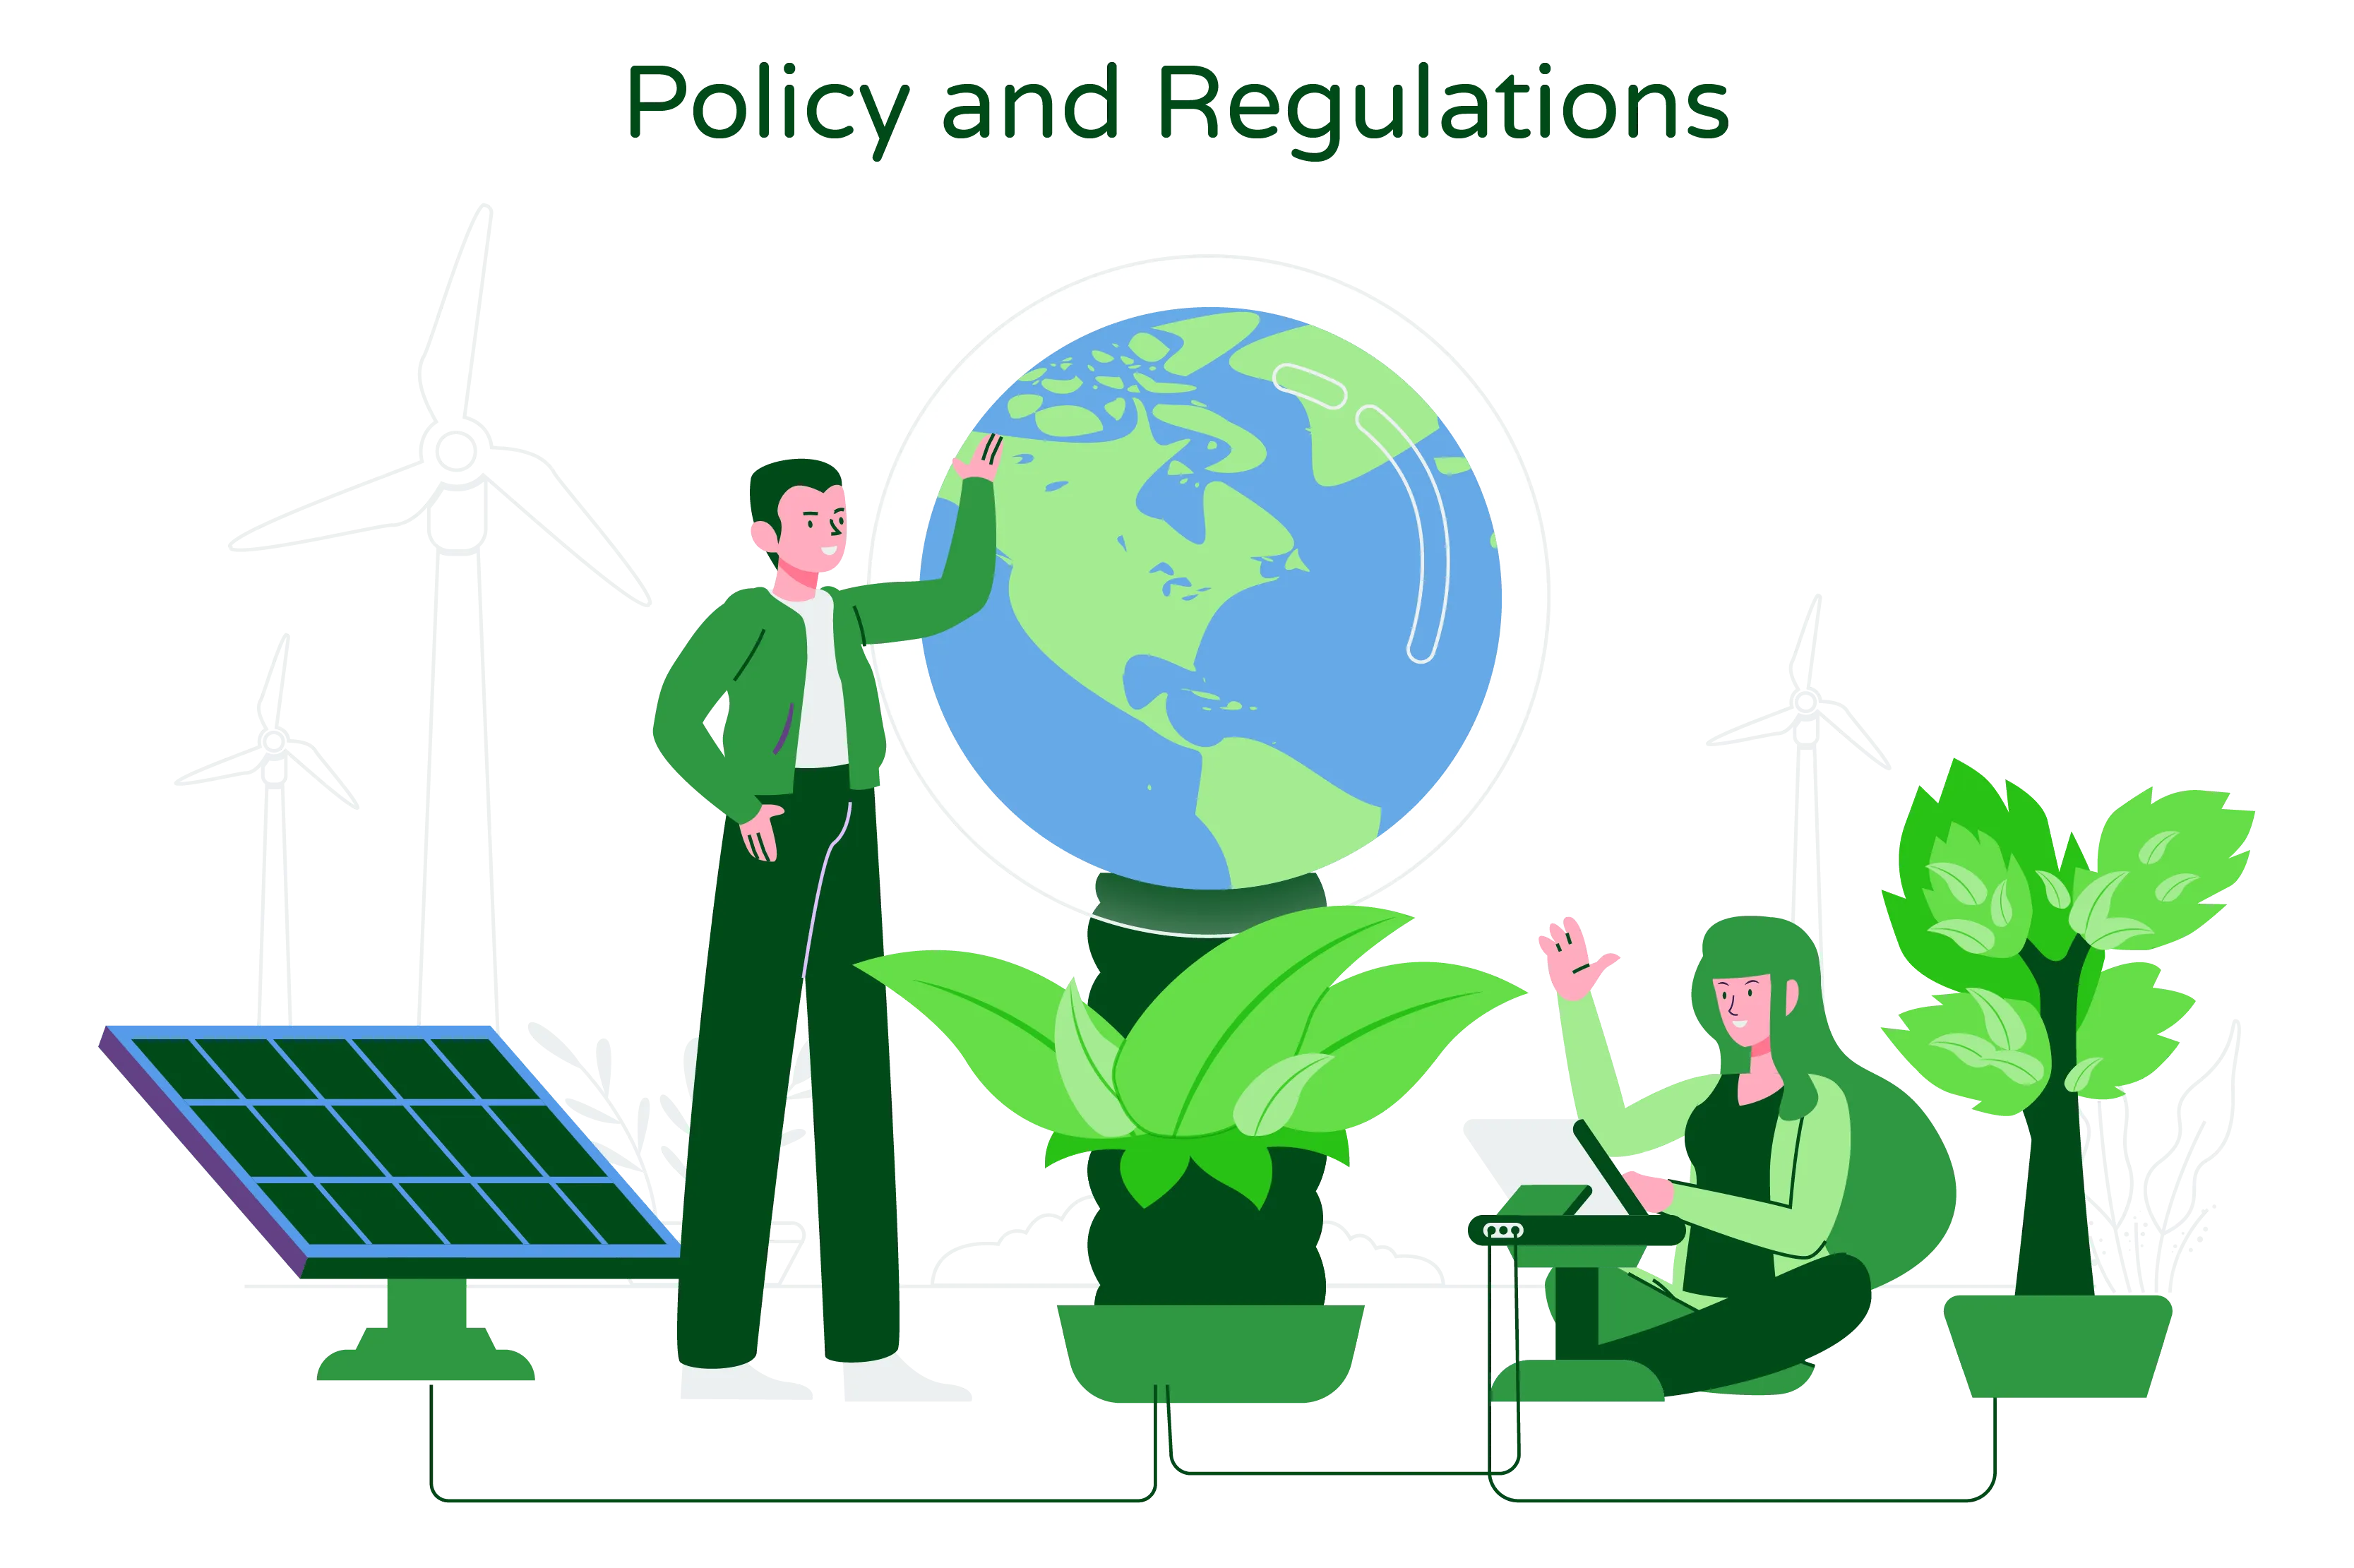 Illustration titled 'Policy and Regulations.' The illustration depicts two people working on policy and regulations for sustainability. They are shown discussing and collaborating. In the center of the illustration, a globe represents the Earth. The background and foreground feature turbines and solar panels, symbolizing renewable energy. Additionally, there are leaves, representing nature and environmental consciousness. The illustration portrays the integration of policy, regulations, and sustainable practices for a greener future.